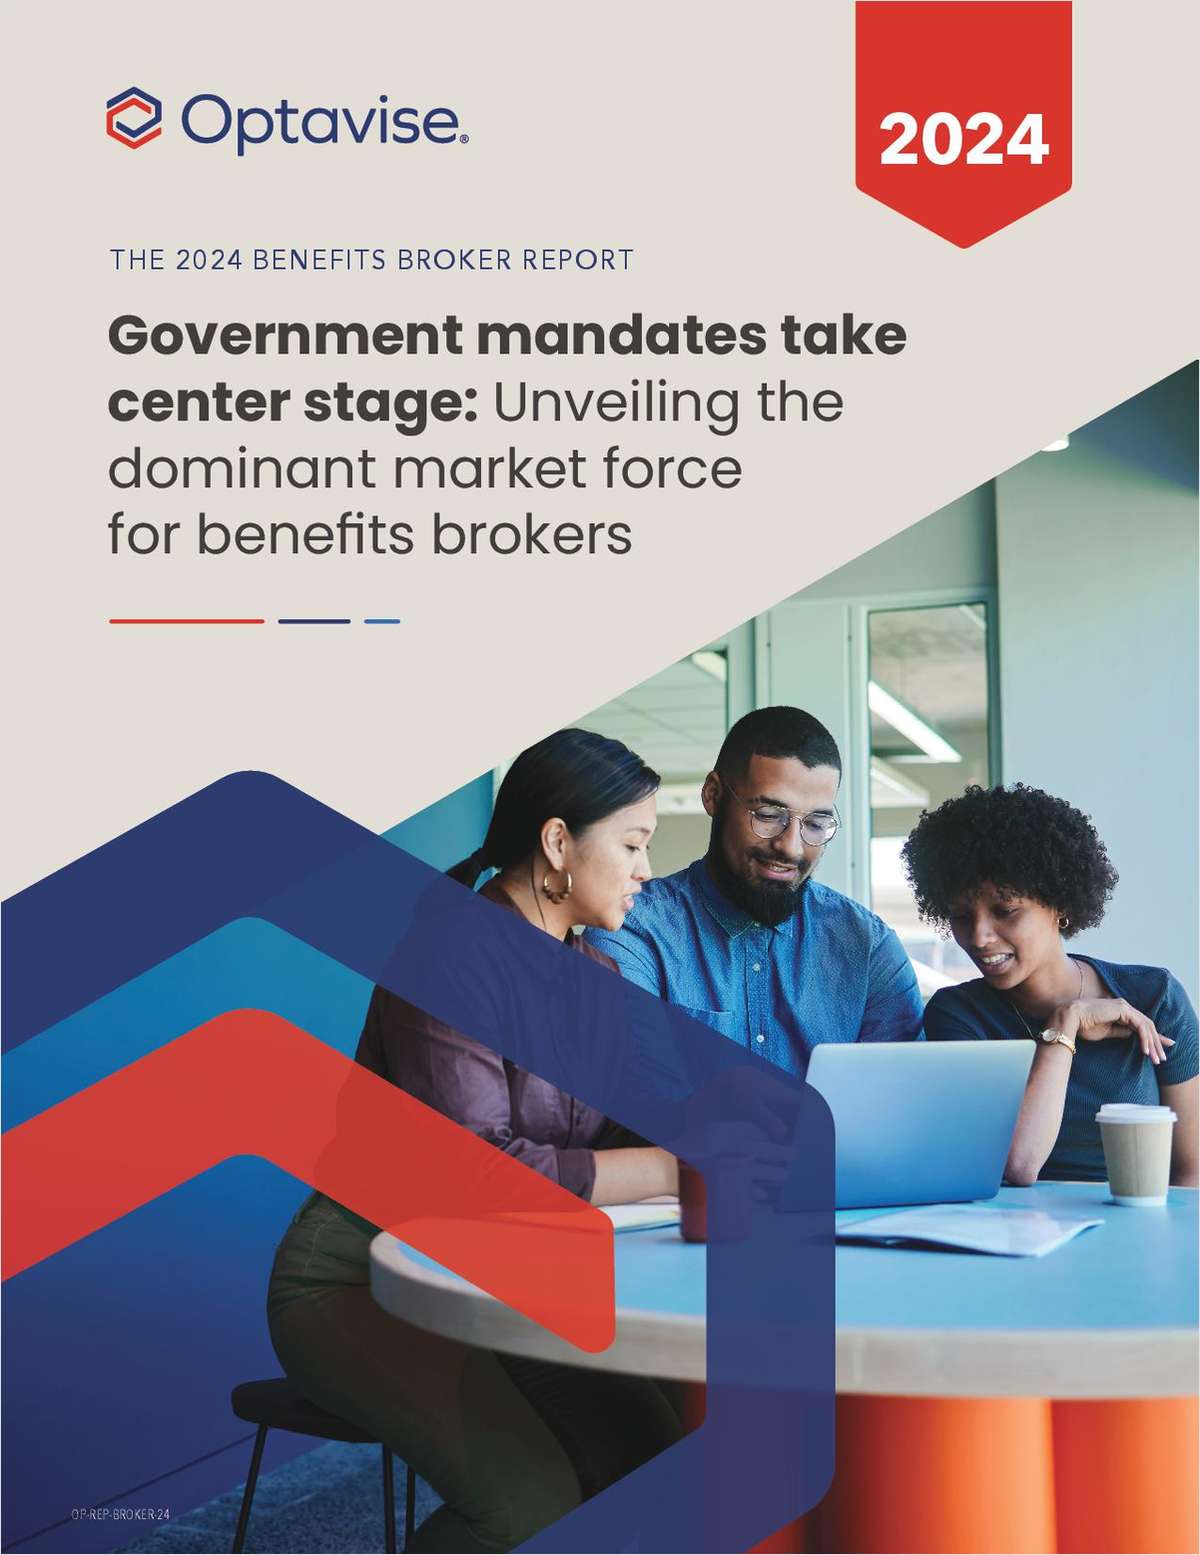 The 2024 Benefits Broker Report: Unveiling the Dominant Market Force for Benefits Brokers link